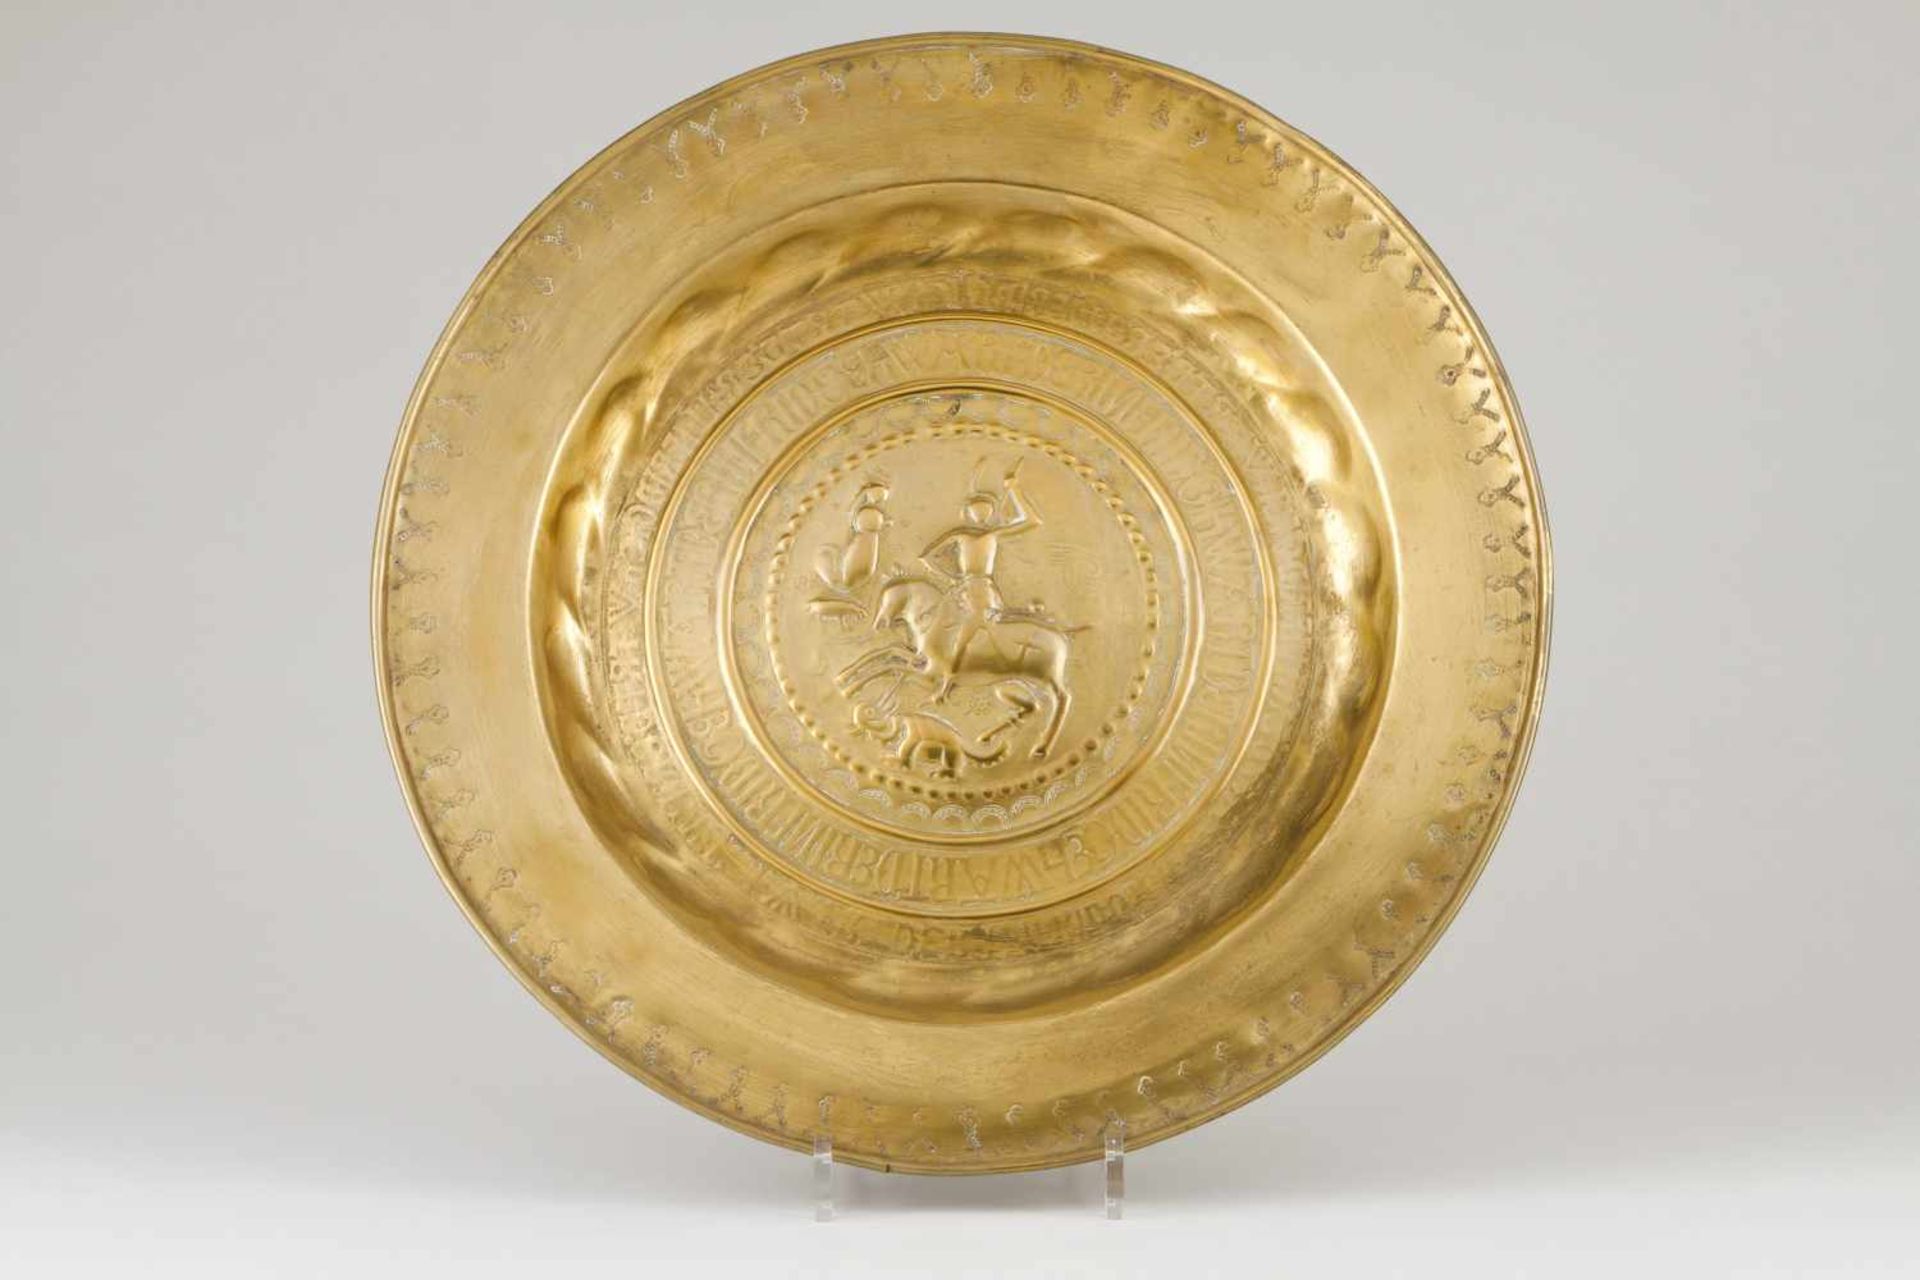 A Nuremberg donations plateYellow metalRaised decoration depicting "Saint George and the dragon"